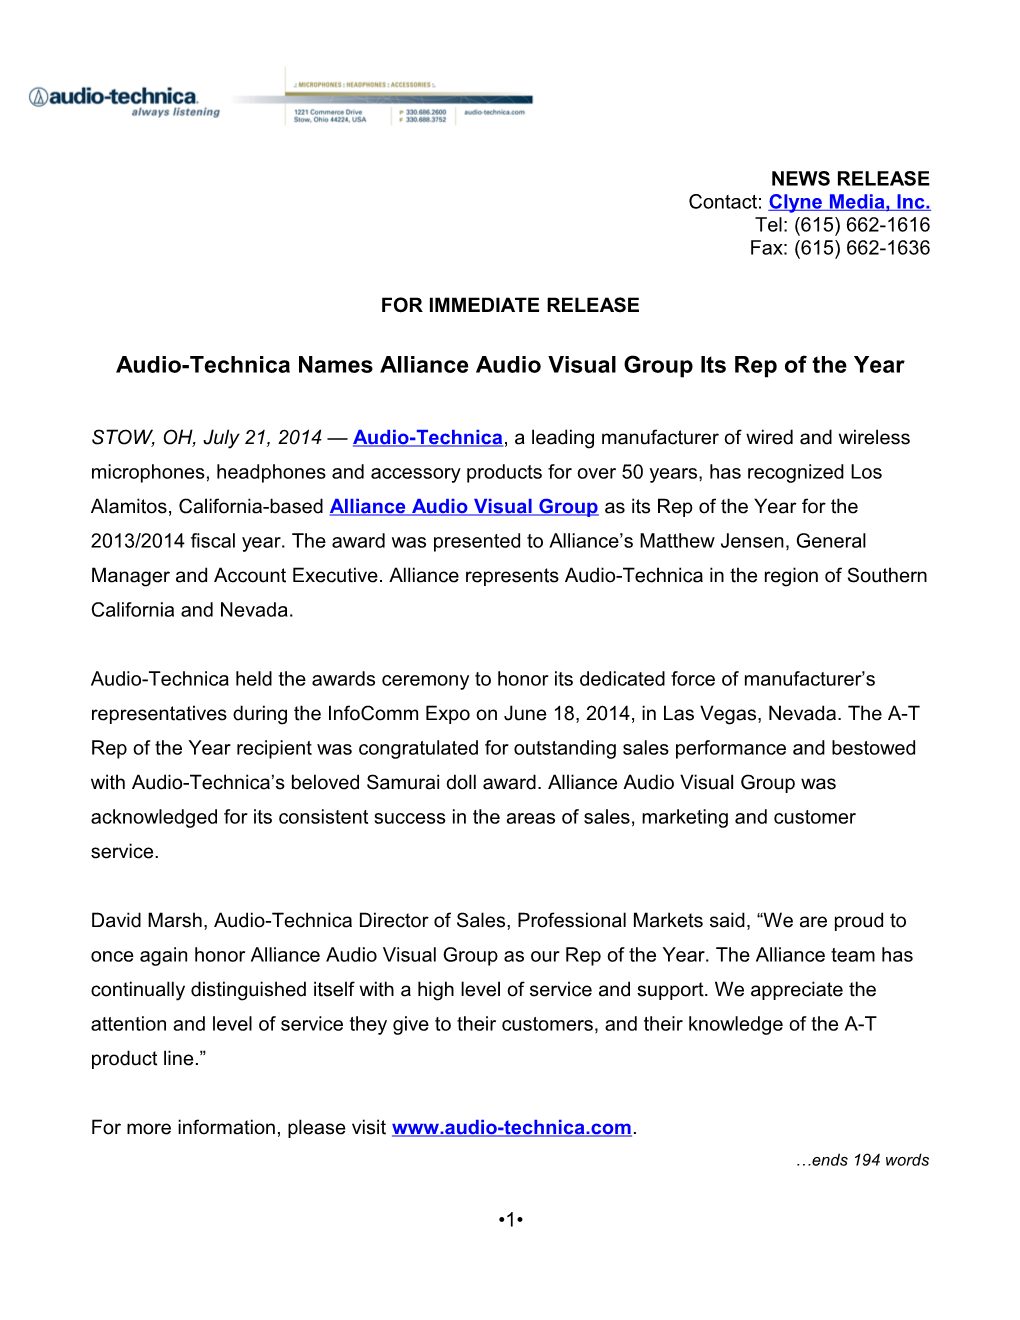 Audio-Technica Names Alliance Audio Visual Group Its Rep of the Year